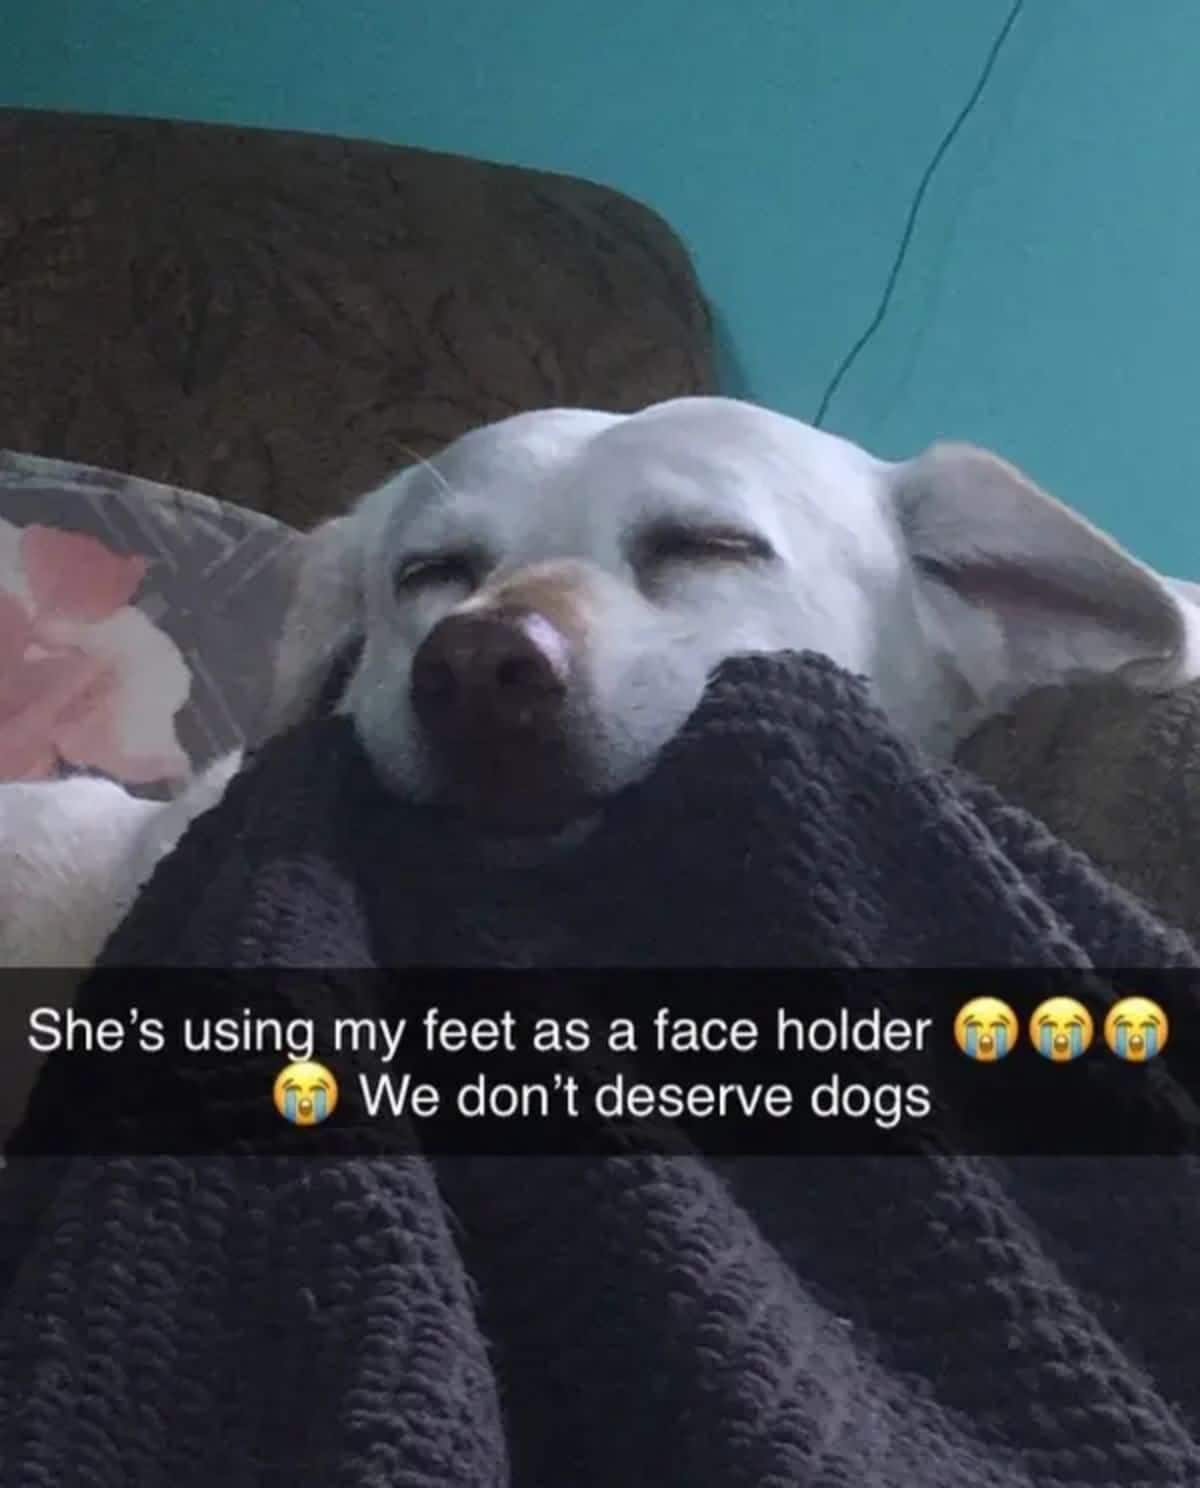 white dog sleeping on a person's feet under a black blanket with a caption saying She's using my feet as a face holder We don't deserve dogs with a crying emojis